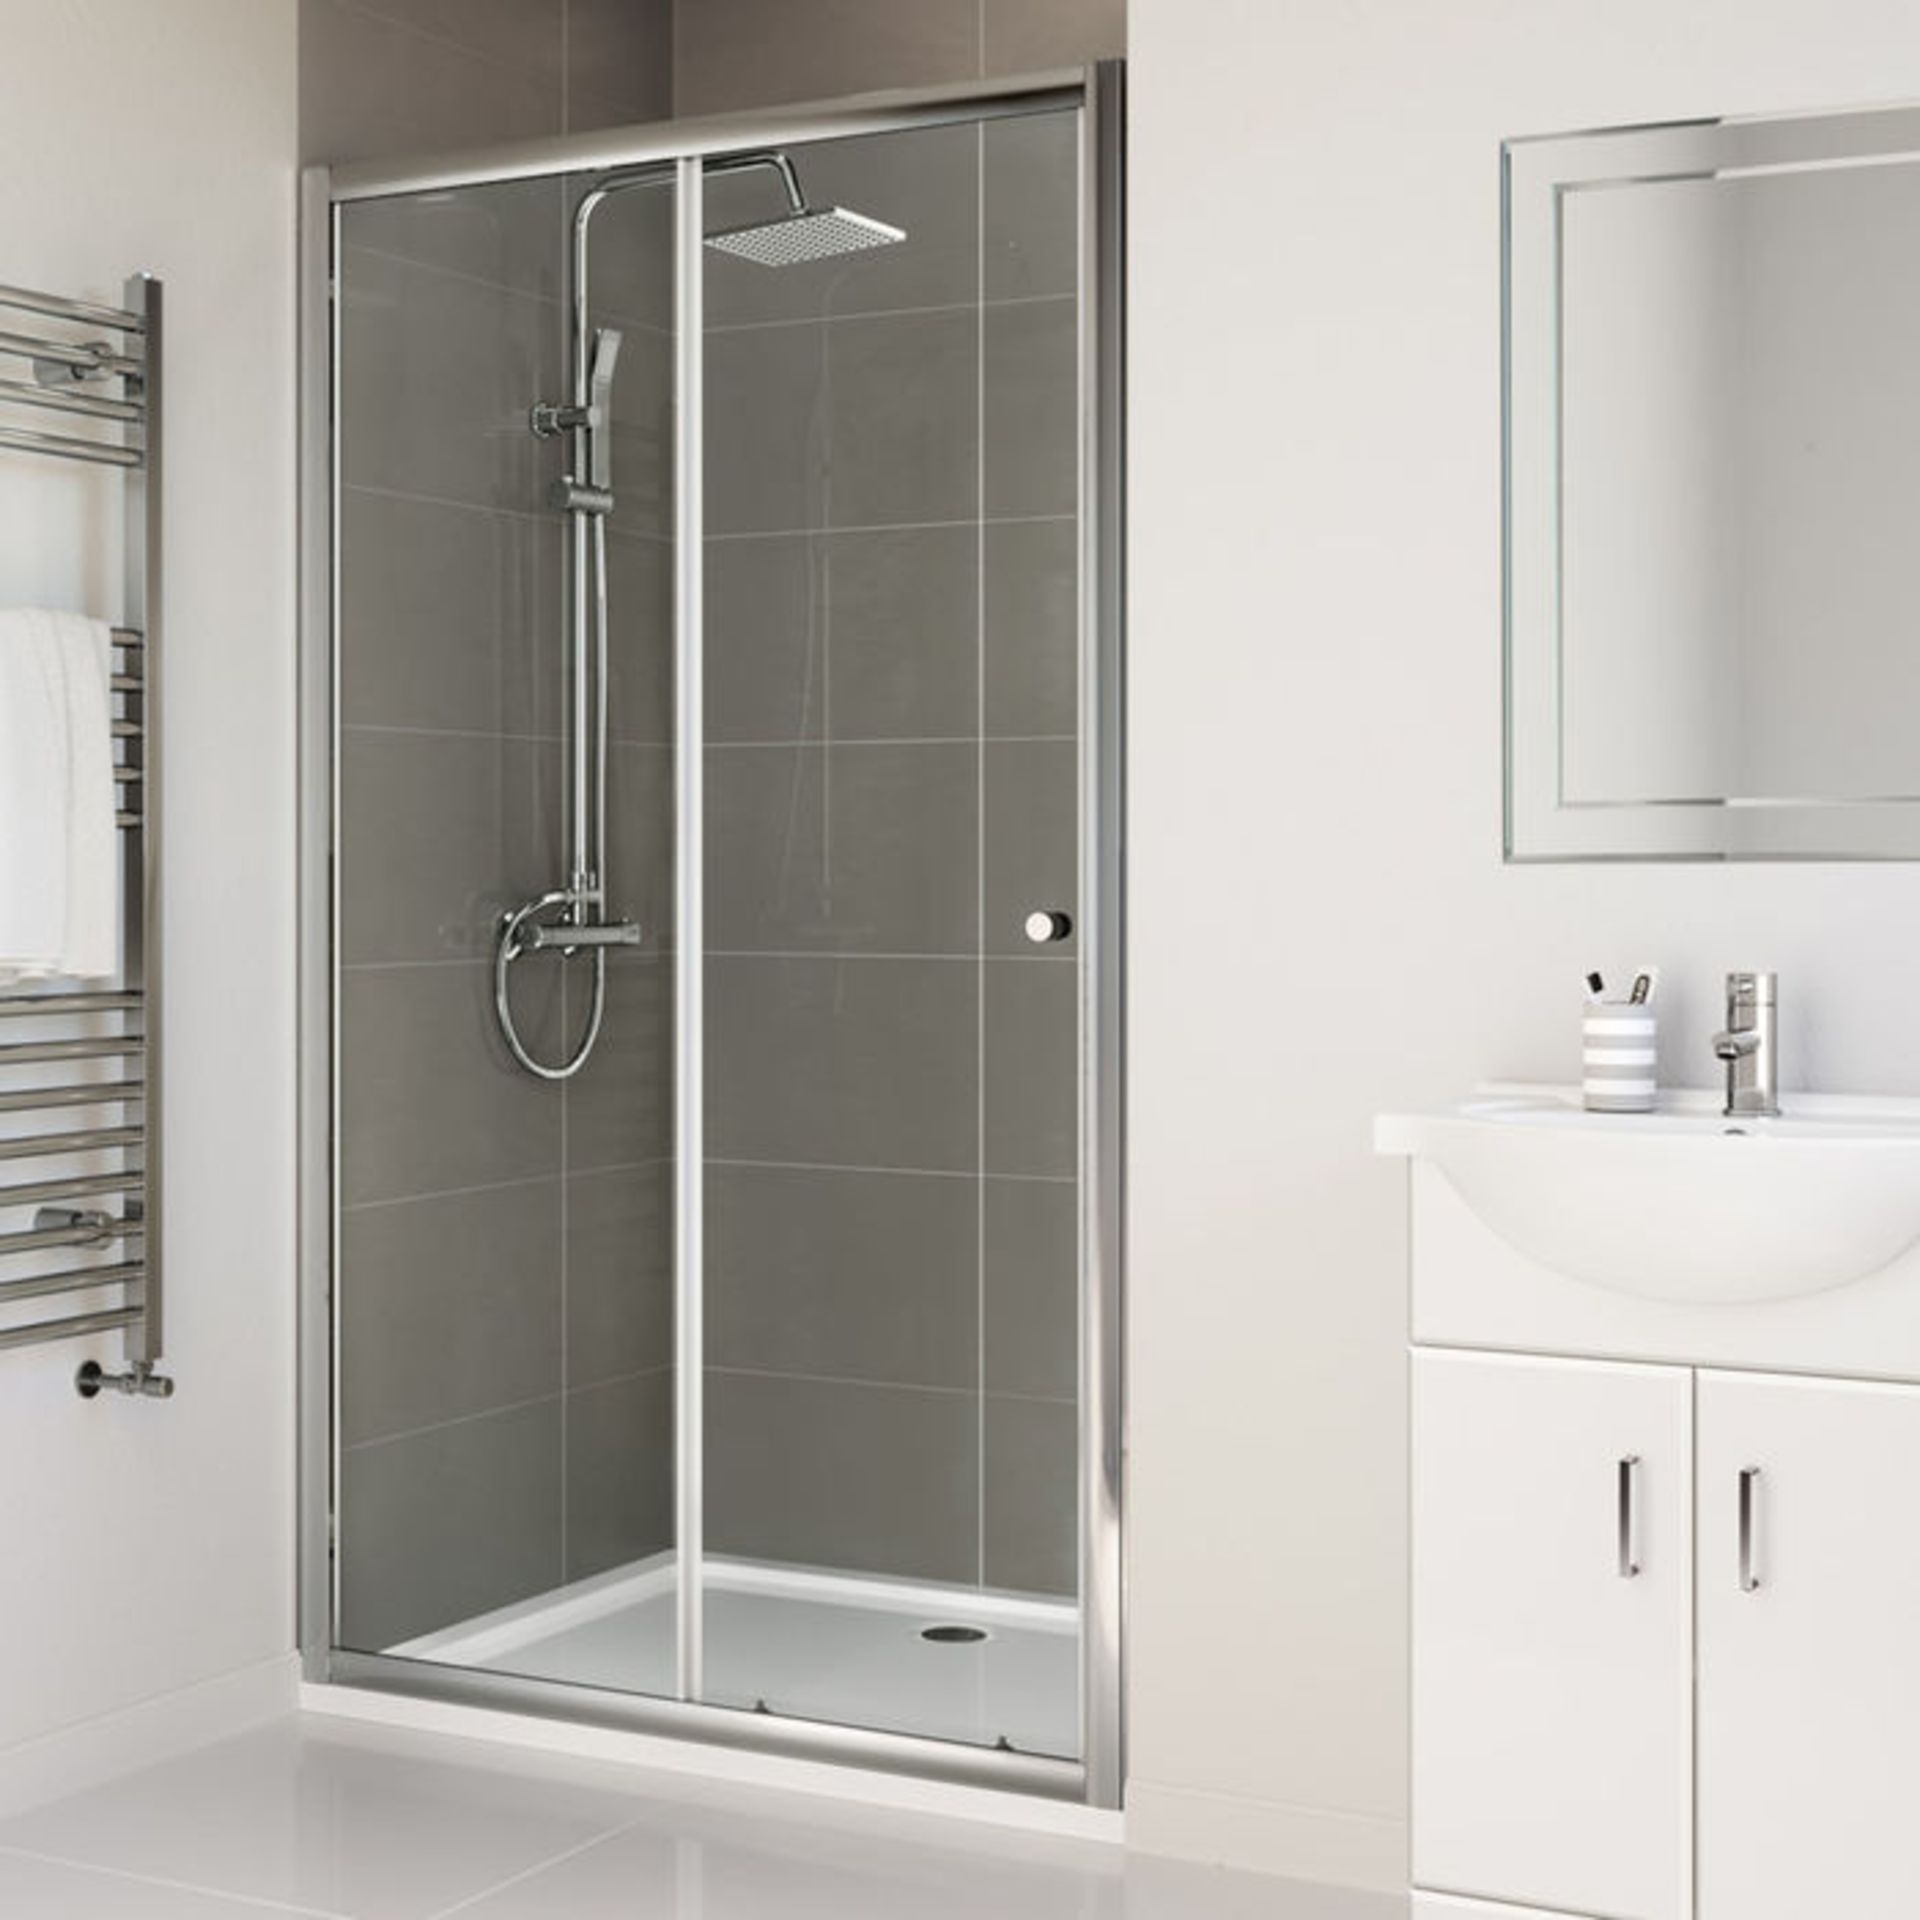 Twyfords 1000mm - Elements Sliding Shower Door. RRP £299.99. 8mm Safety Glass Fully waterproof...